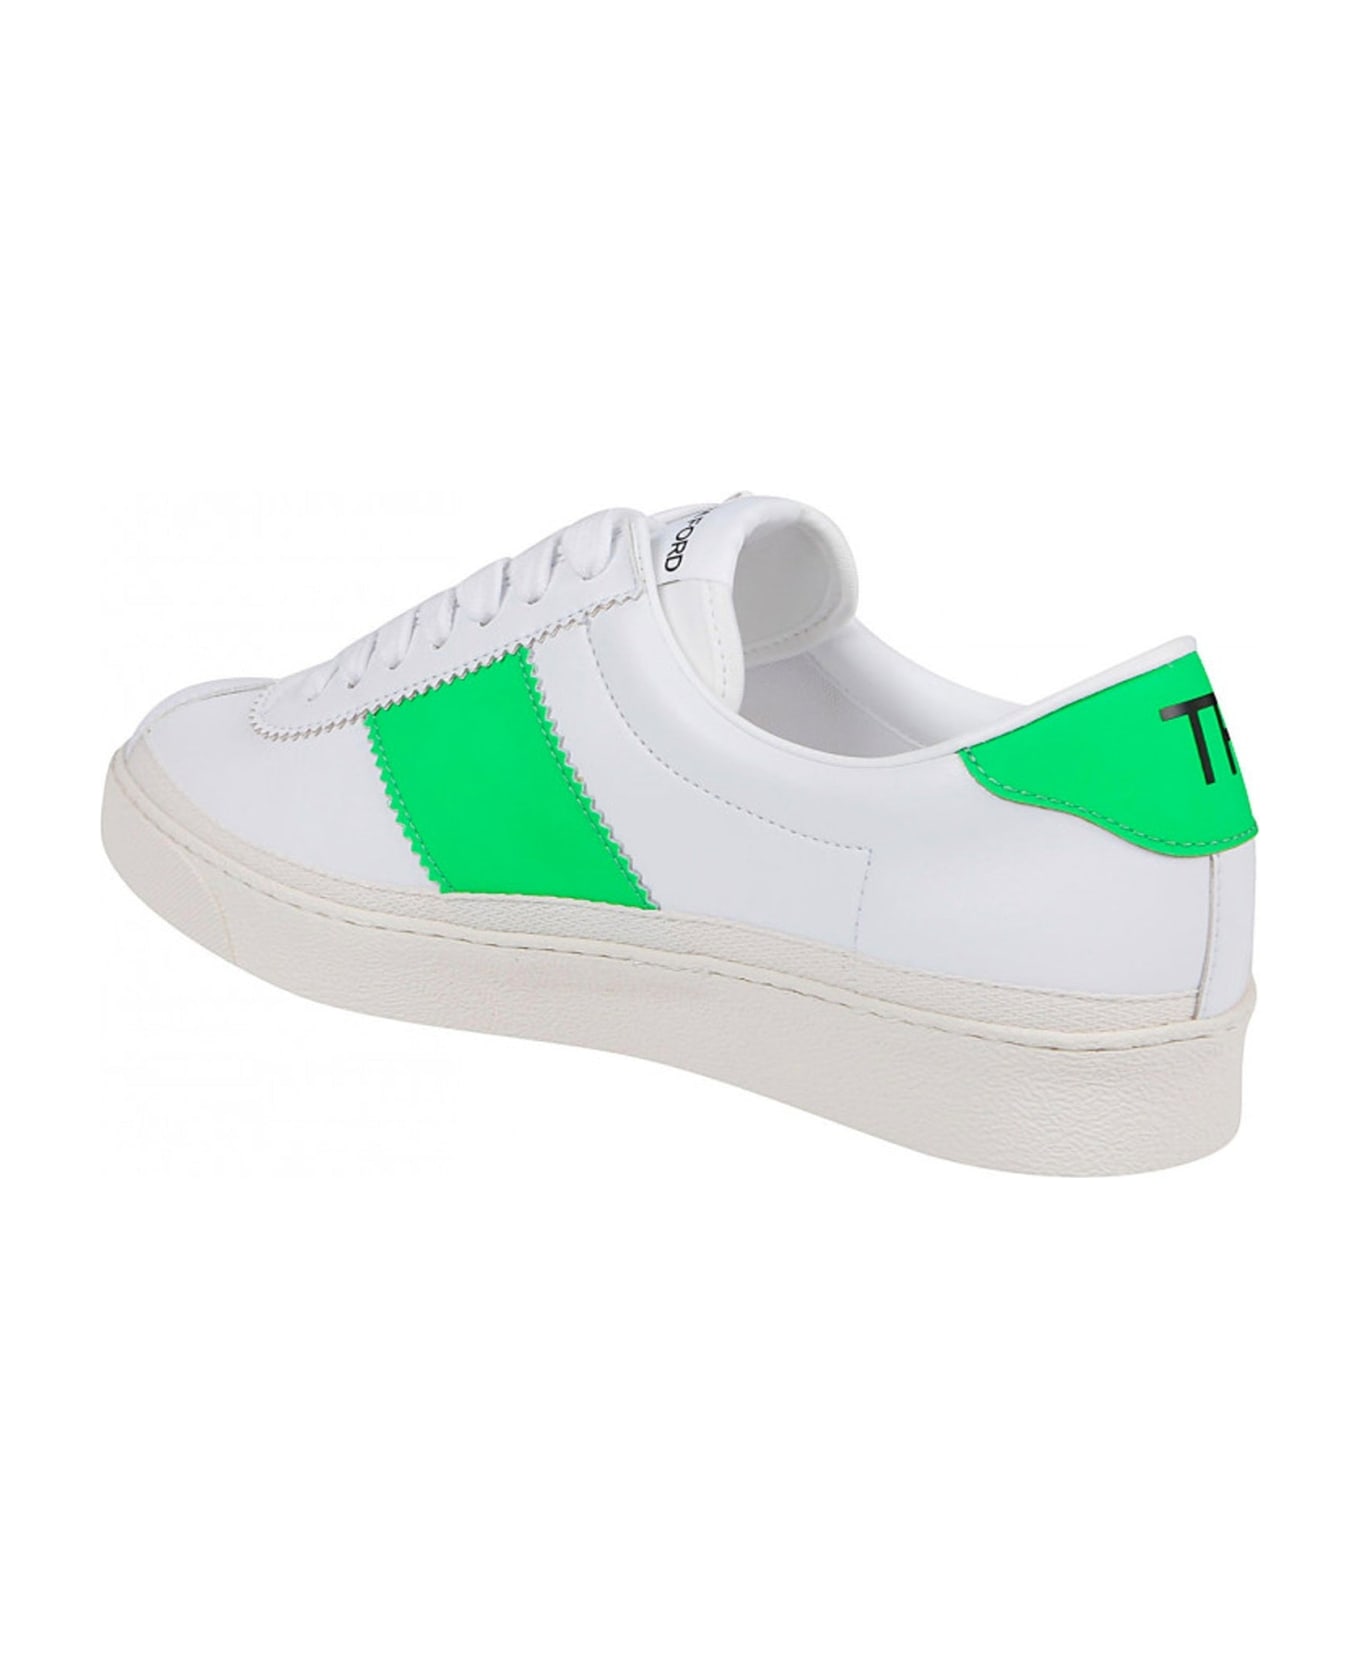 Tom Ford Leather Sneakers - White